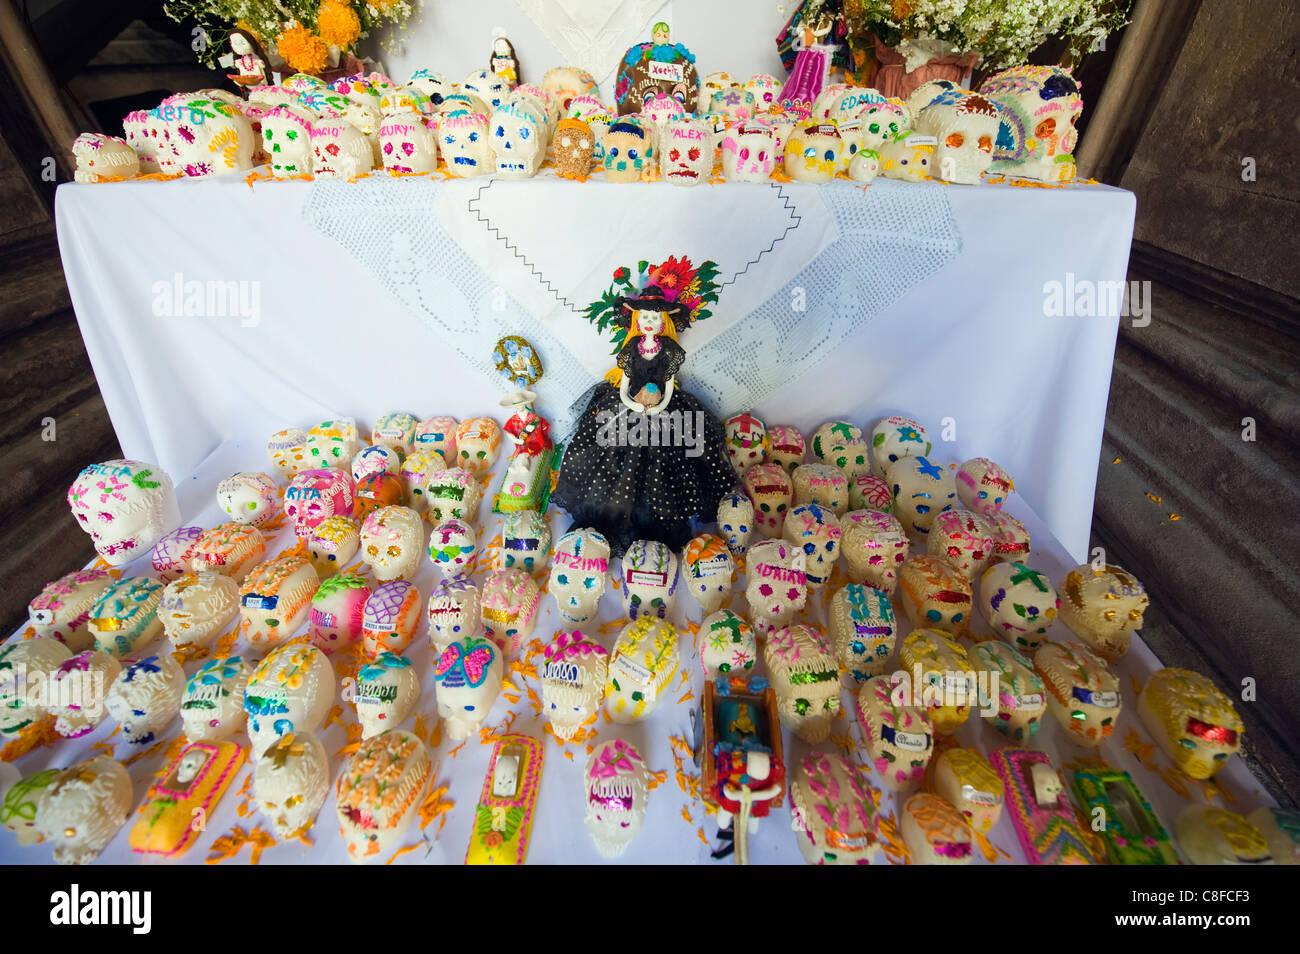 Wax skulls as decorations on display, Dia de Muertos (Day of the Dead, Morelia, Michoacan state, Mexico Stock Photo